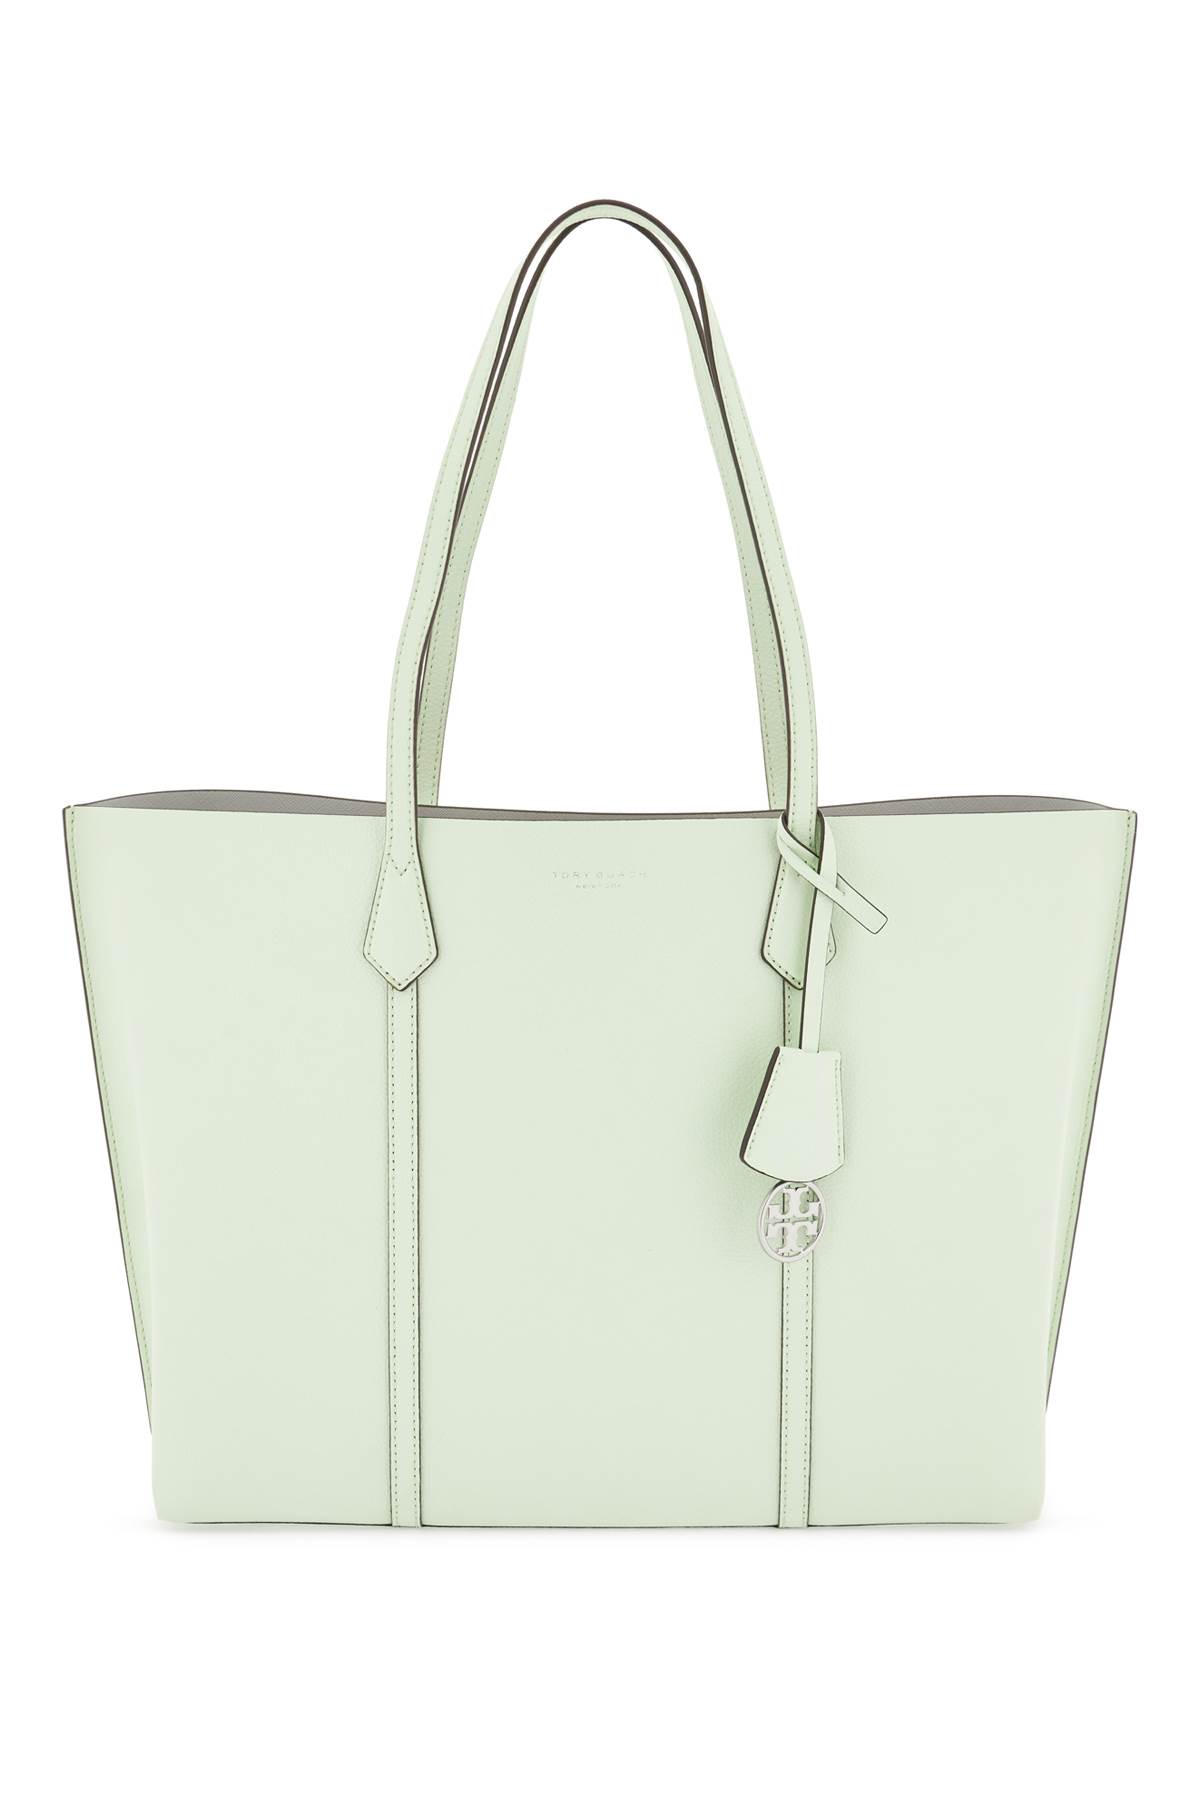 Shop Tory Burch Perry Shopping Bag In Meadow Mist (green)